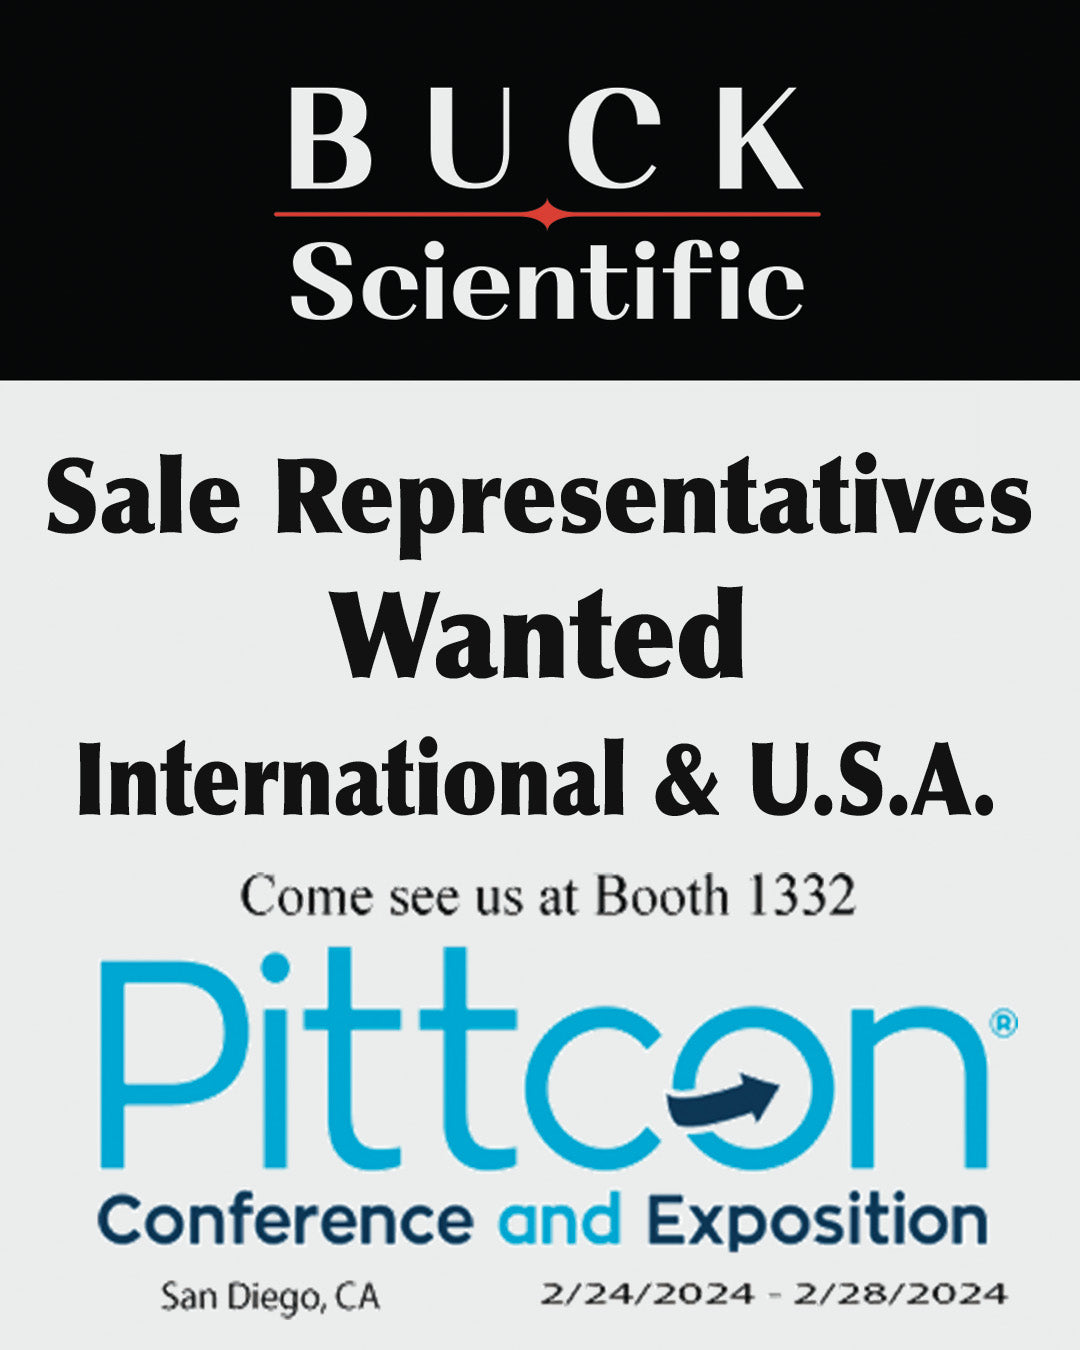 ALL REPS Wanted, Find us at Pittcon 2024 Booth 1332